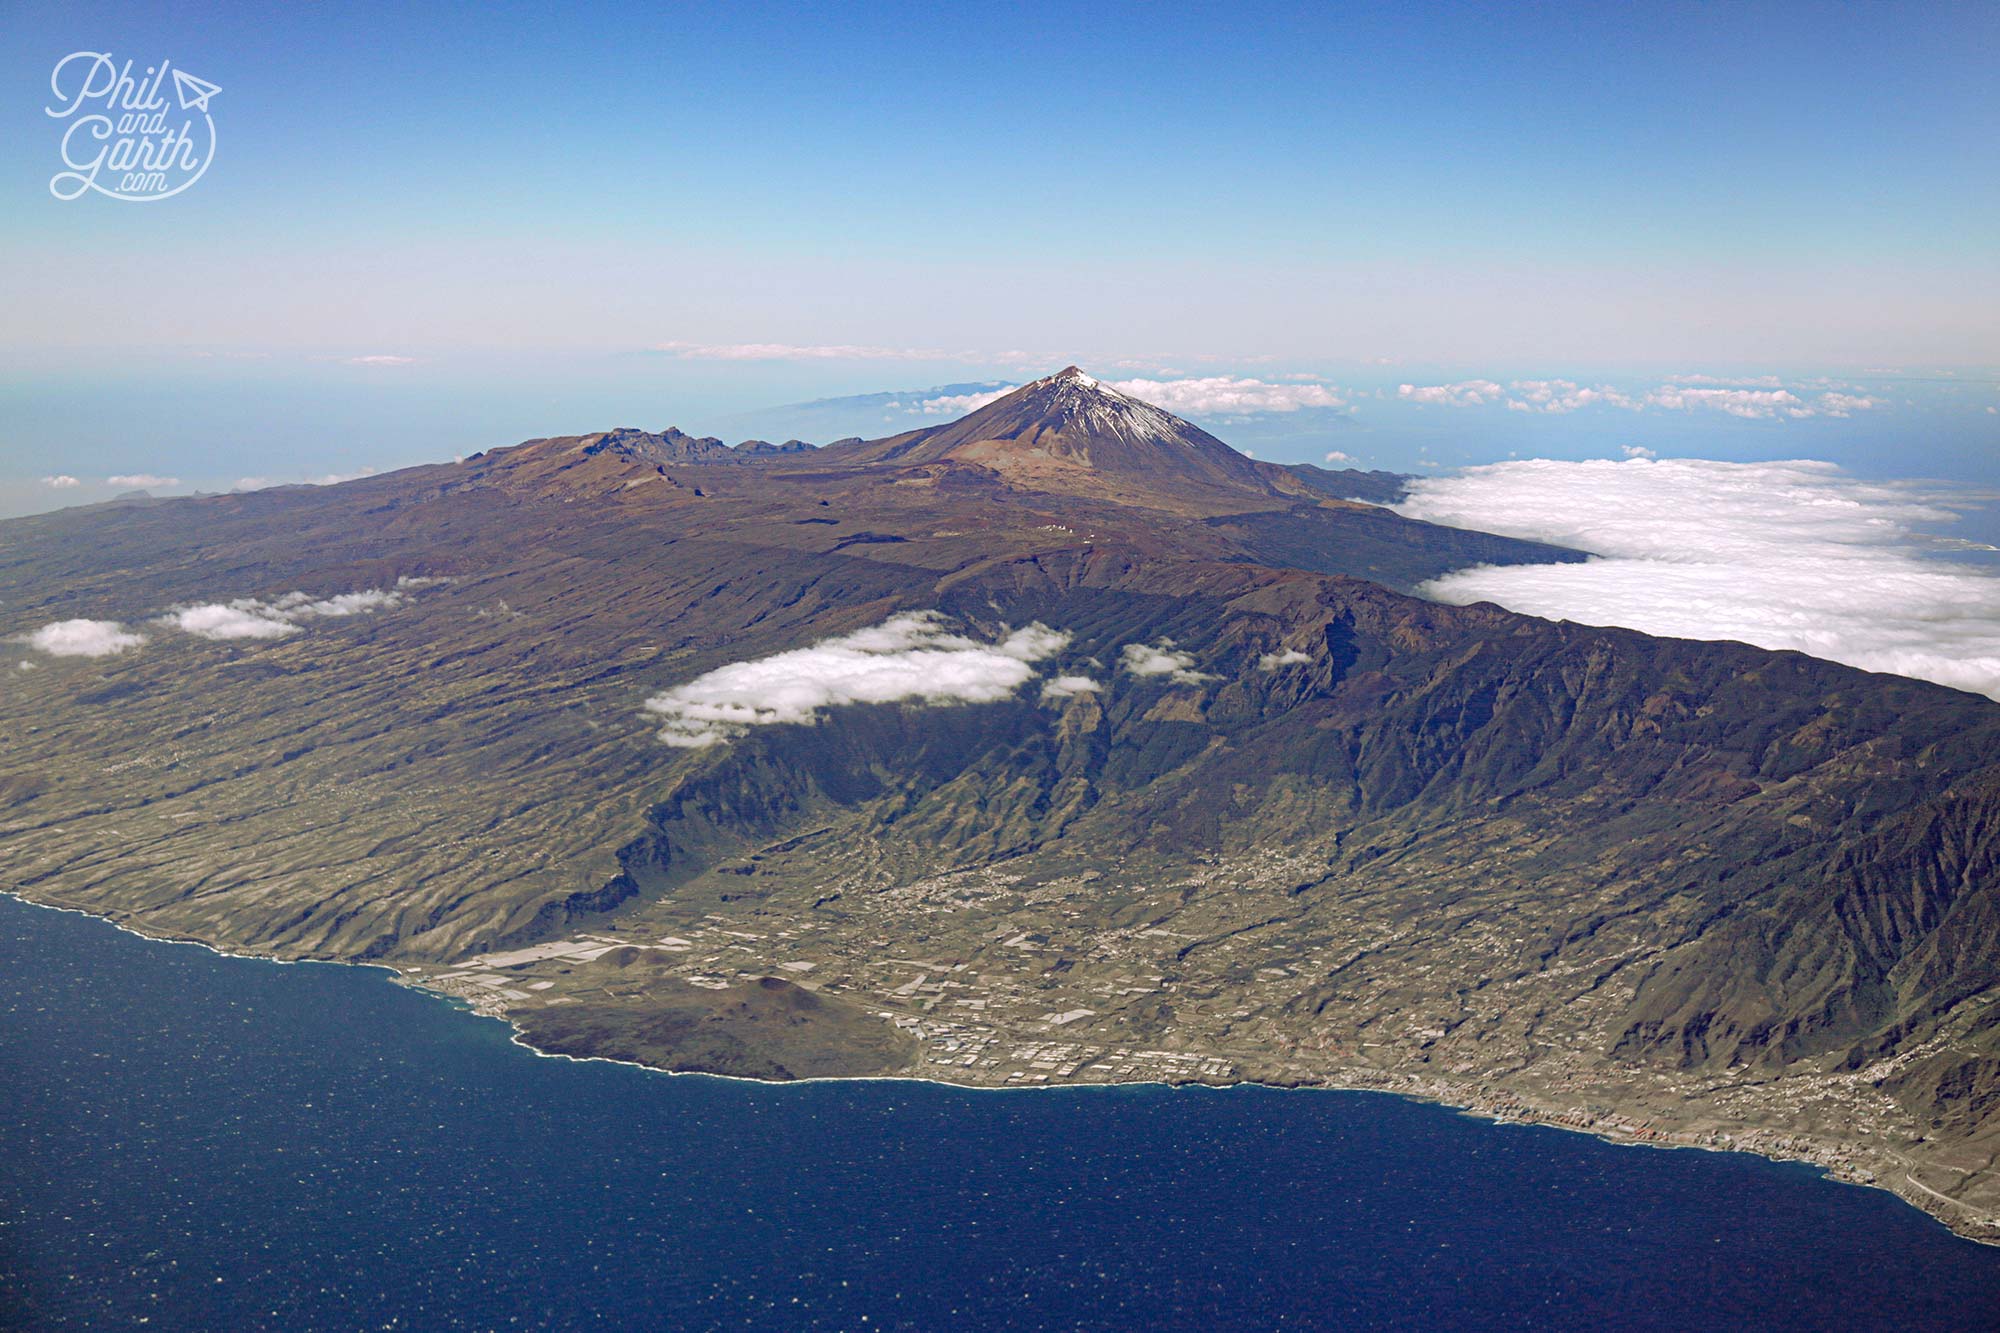 Tenerife is located in the middle of the Atlantic Ocean and is known as ‘The Island of Eternal Spring’